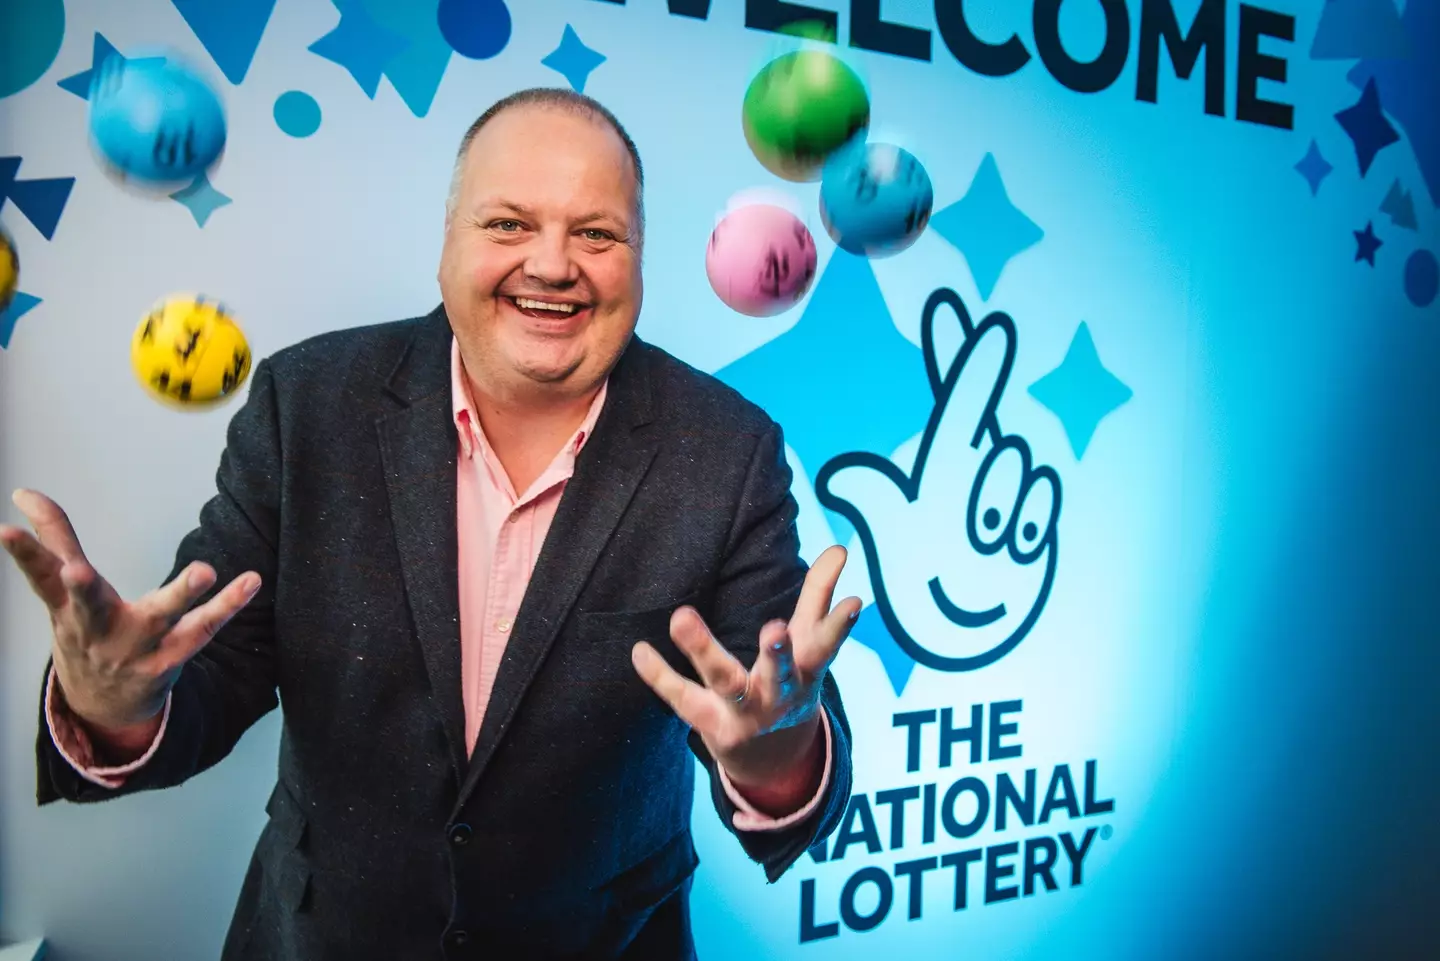 Andy Carter has witnessed over £2 billion worth of Lottery winners throughout his years as a senior financial advisor.